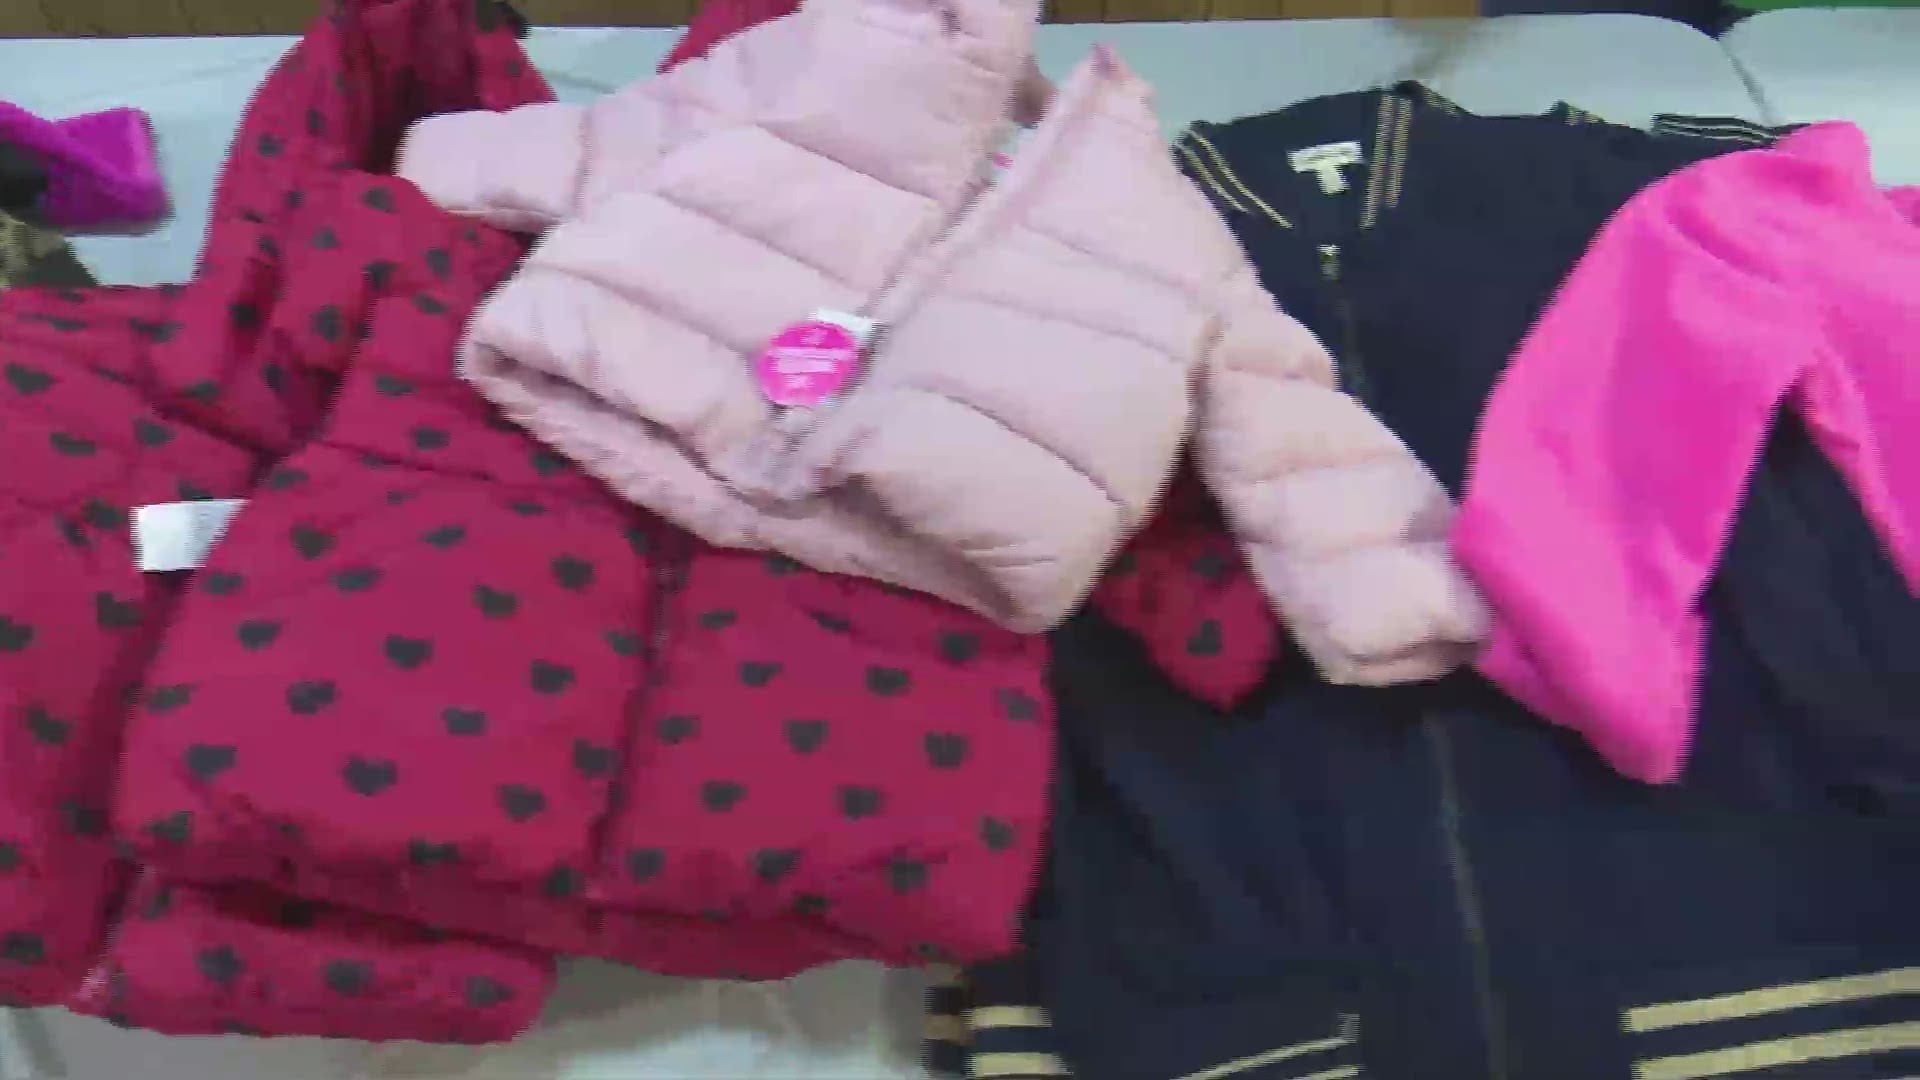 Cozy Kidz gave away 200 new coats and over 100 pairs of shoes to children in need on Saturday.